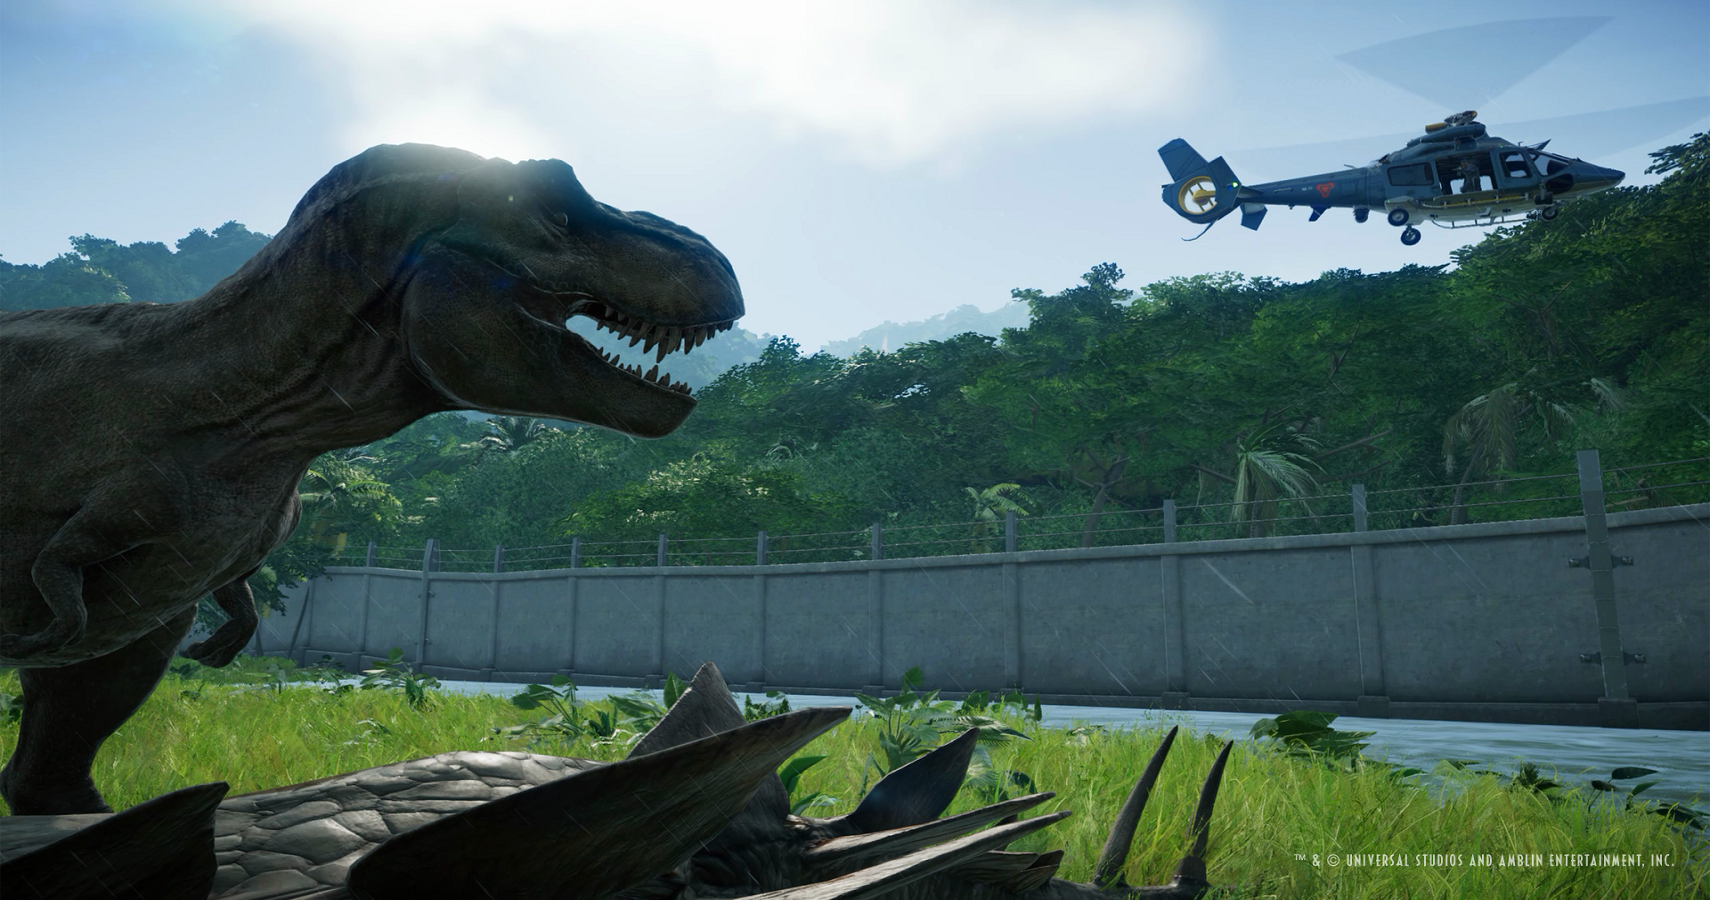 T-Rex looking at a helicopter